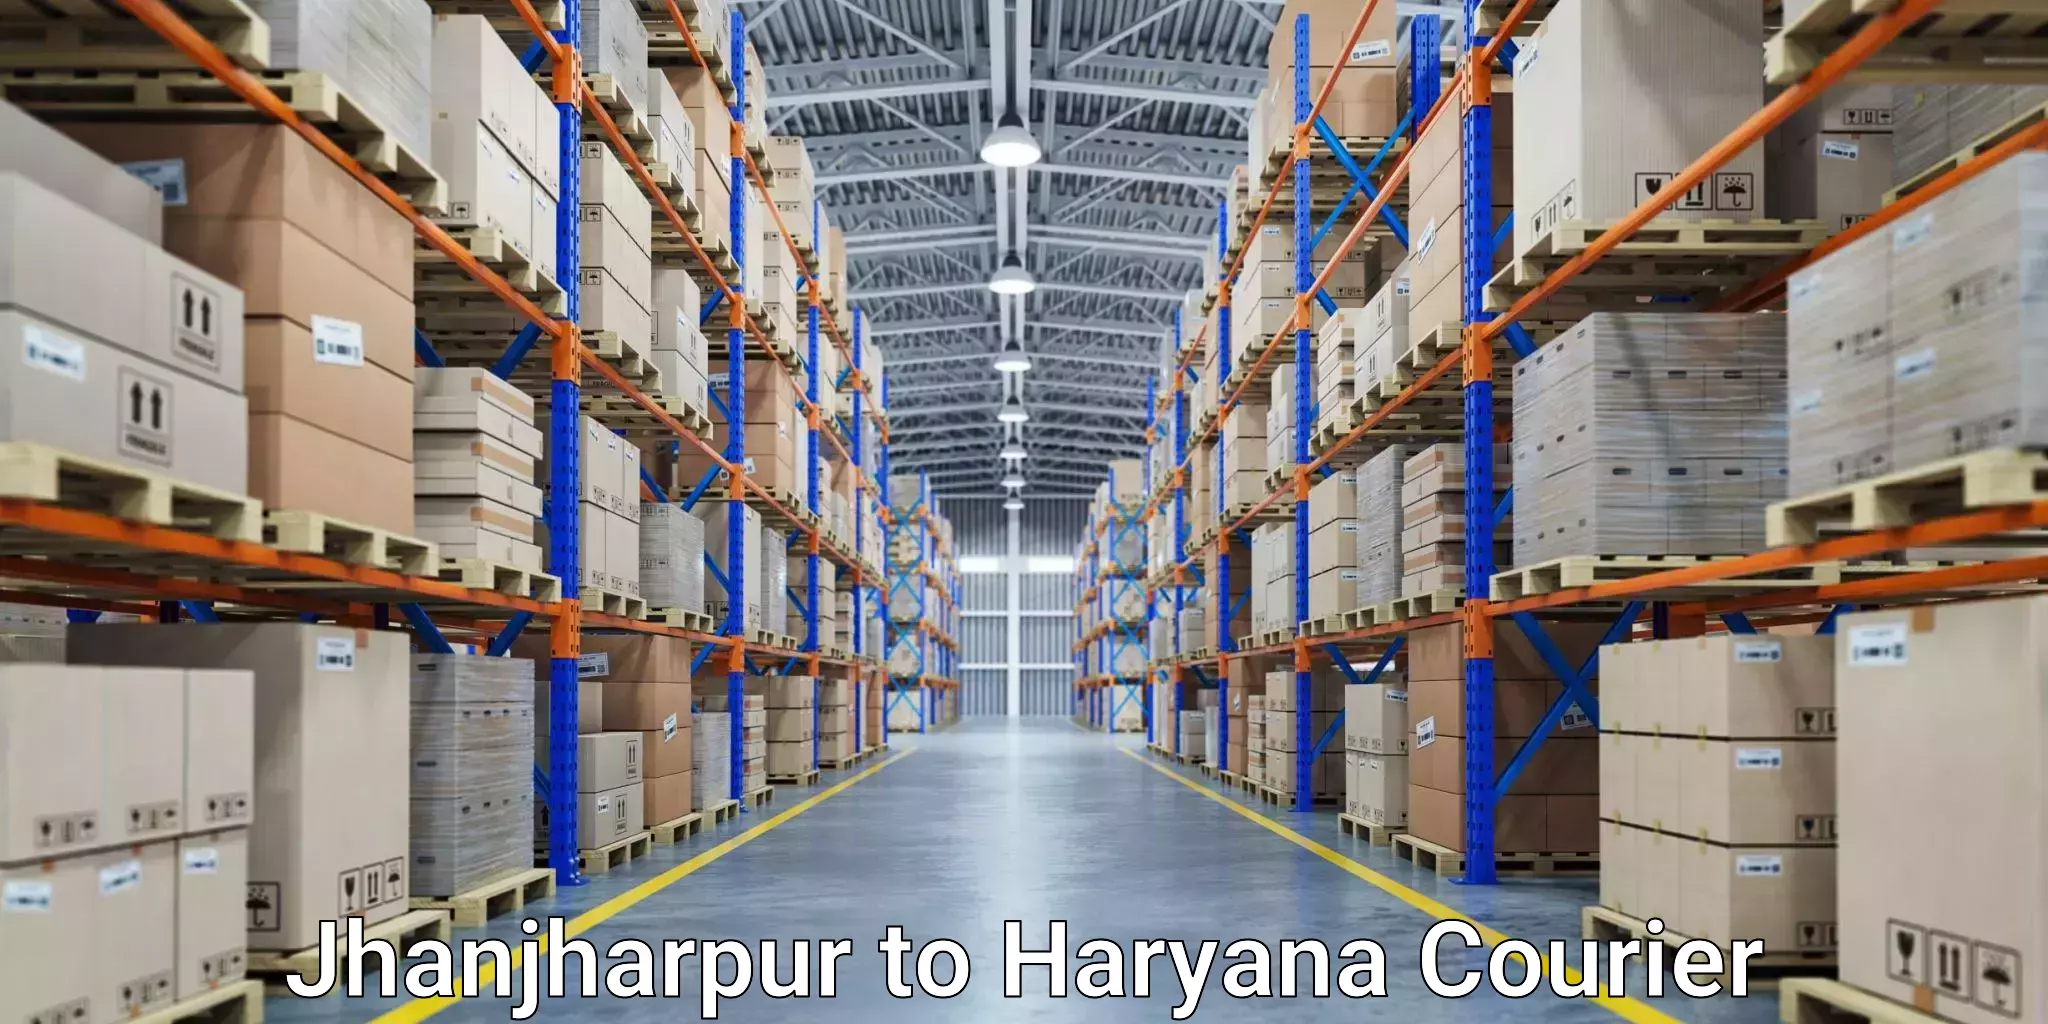 Sustainable courier practices Jhanjharpur to Chaudhary Charan Singh Haryana Agricultural University Hisar